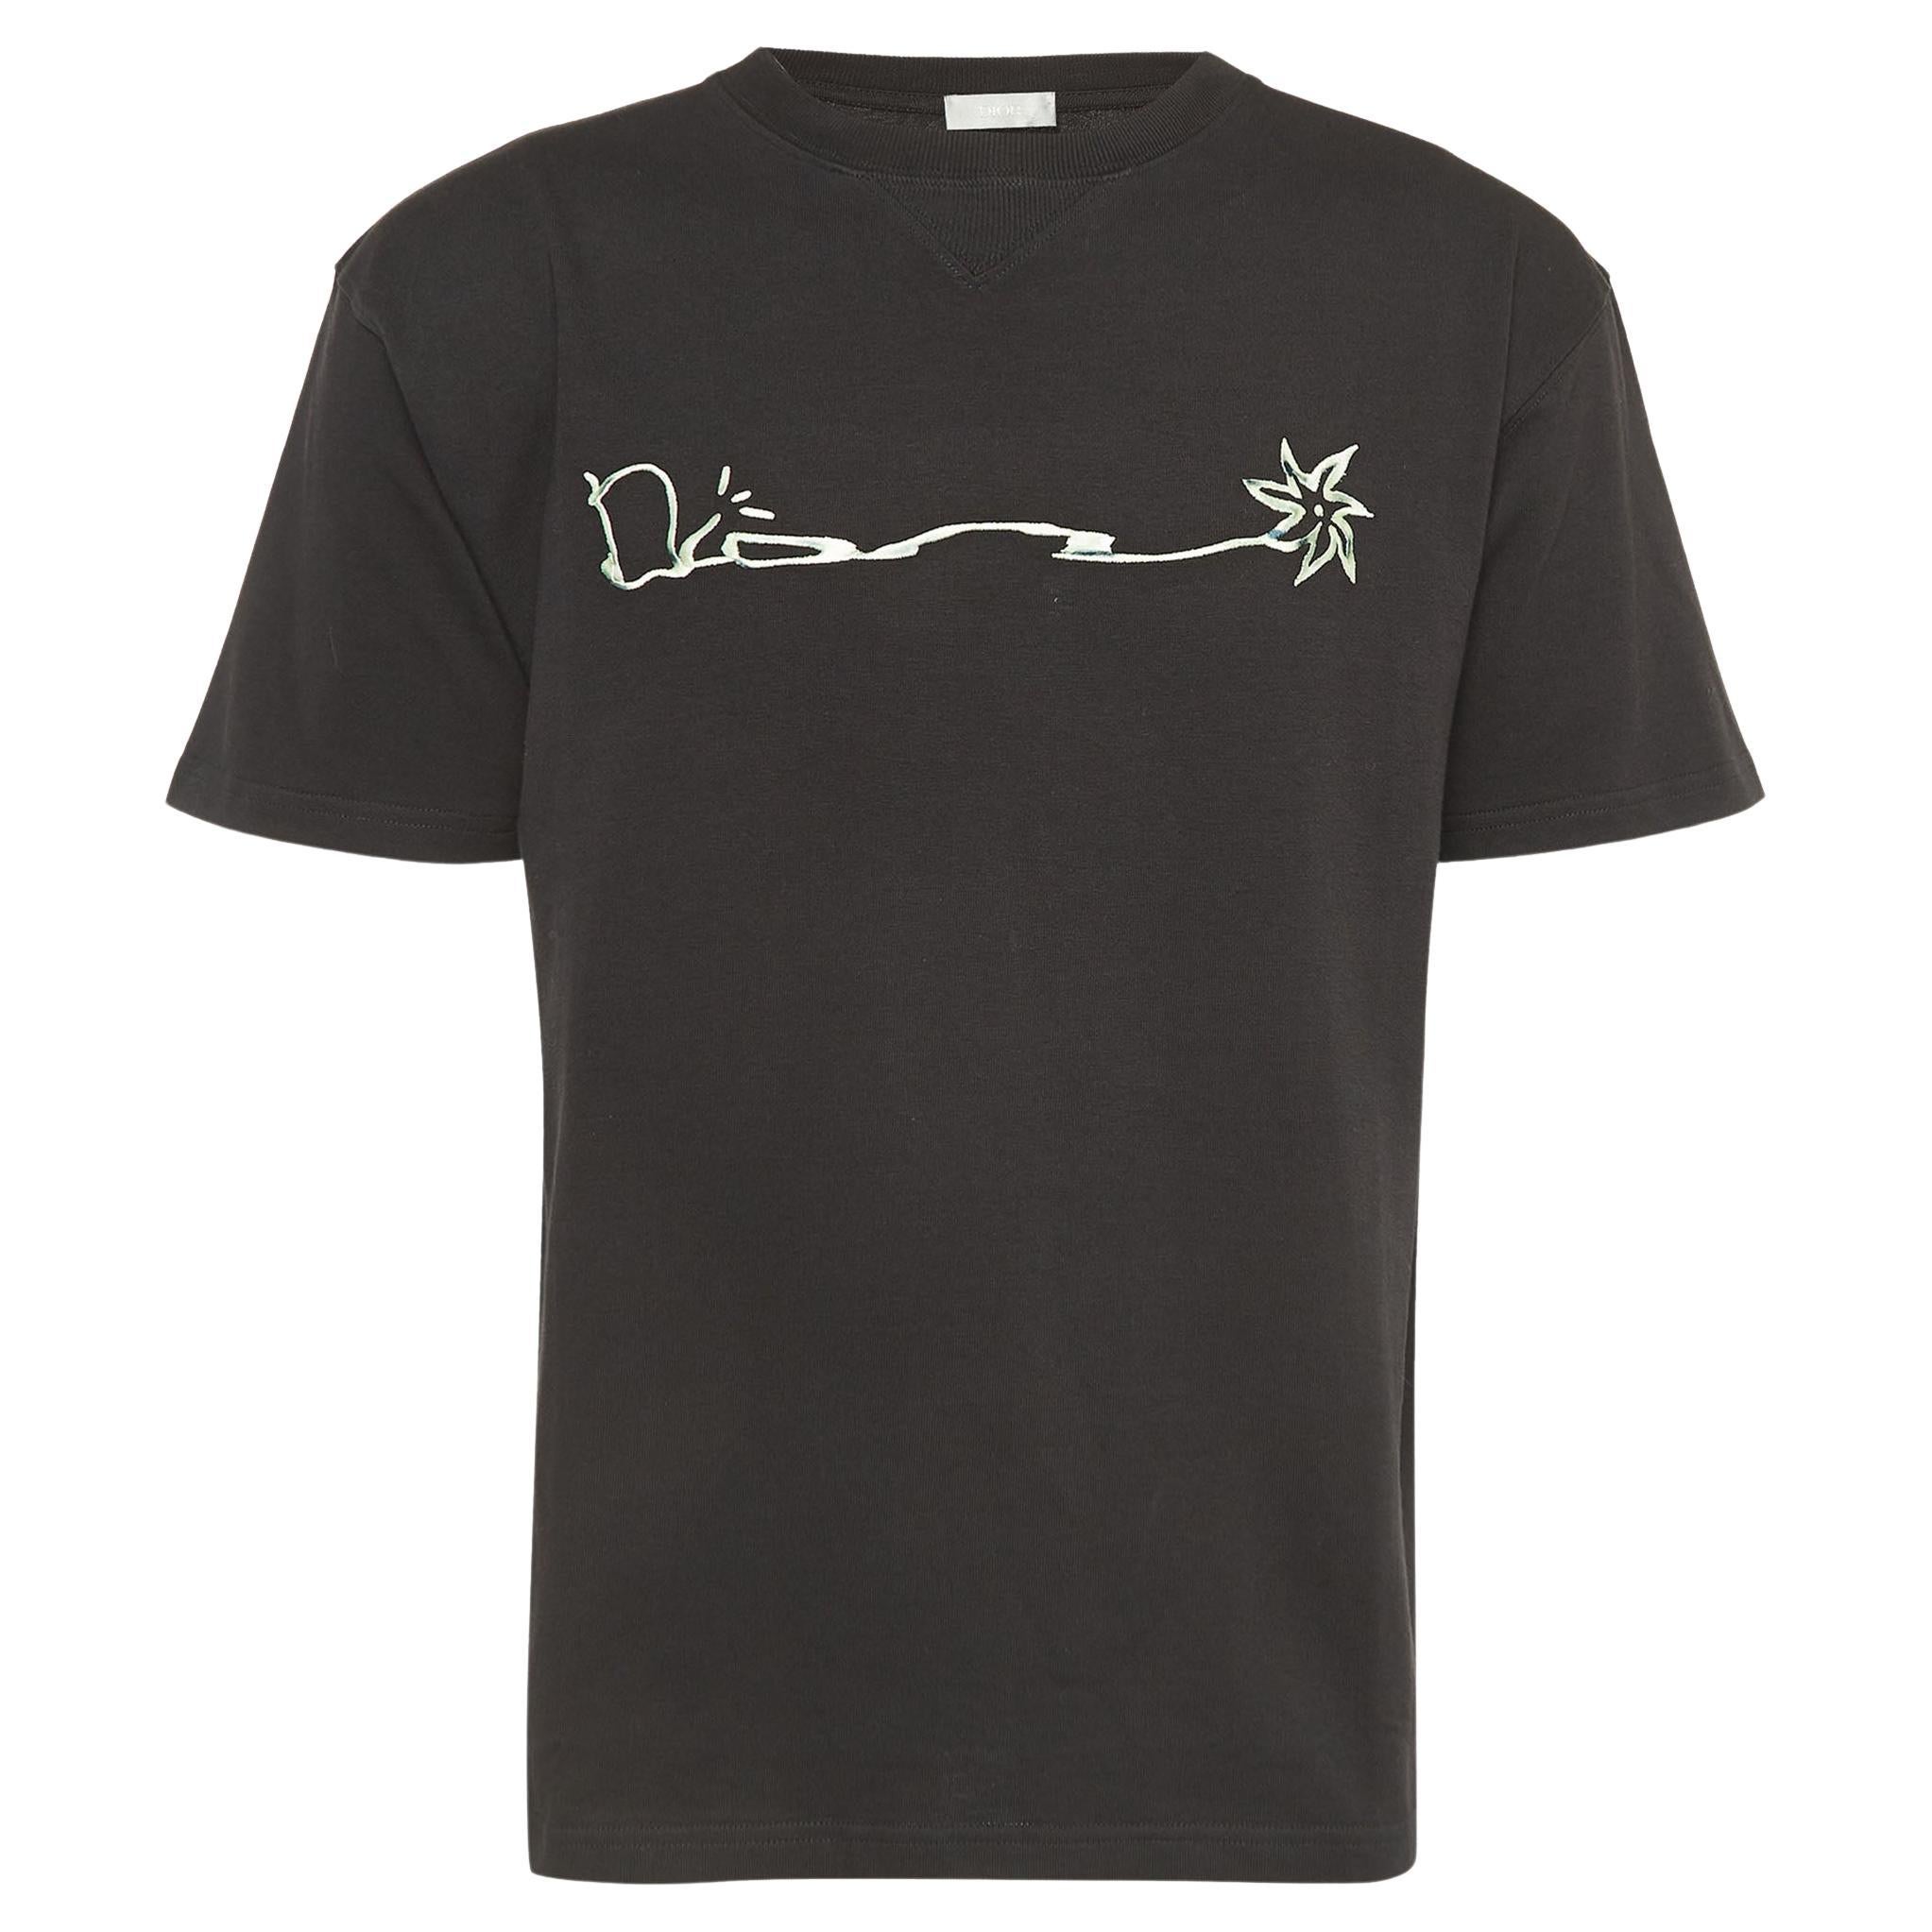 Dior Homme X Cactus Jack Black Embroidered Cotton Oversized T-Shirt M For Sale